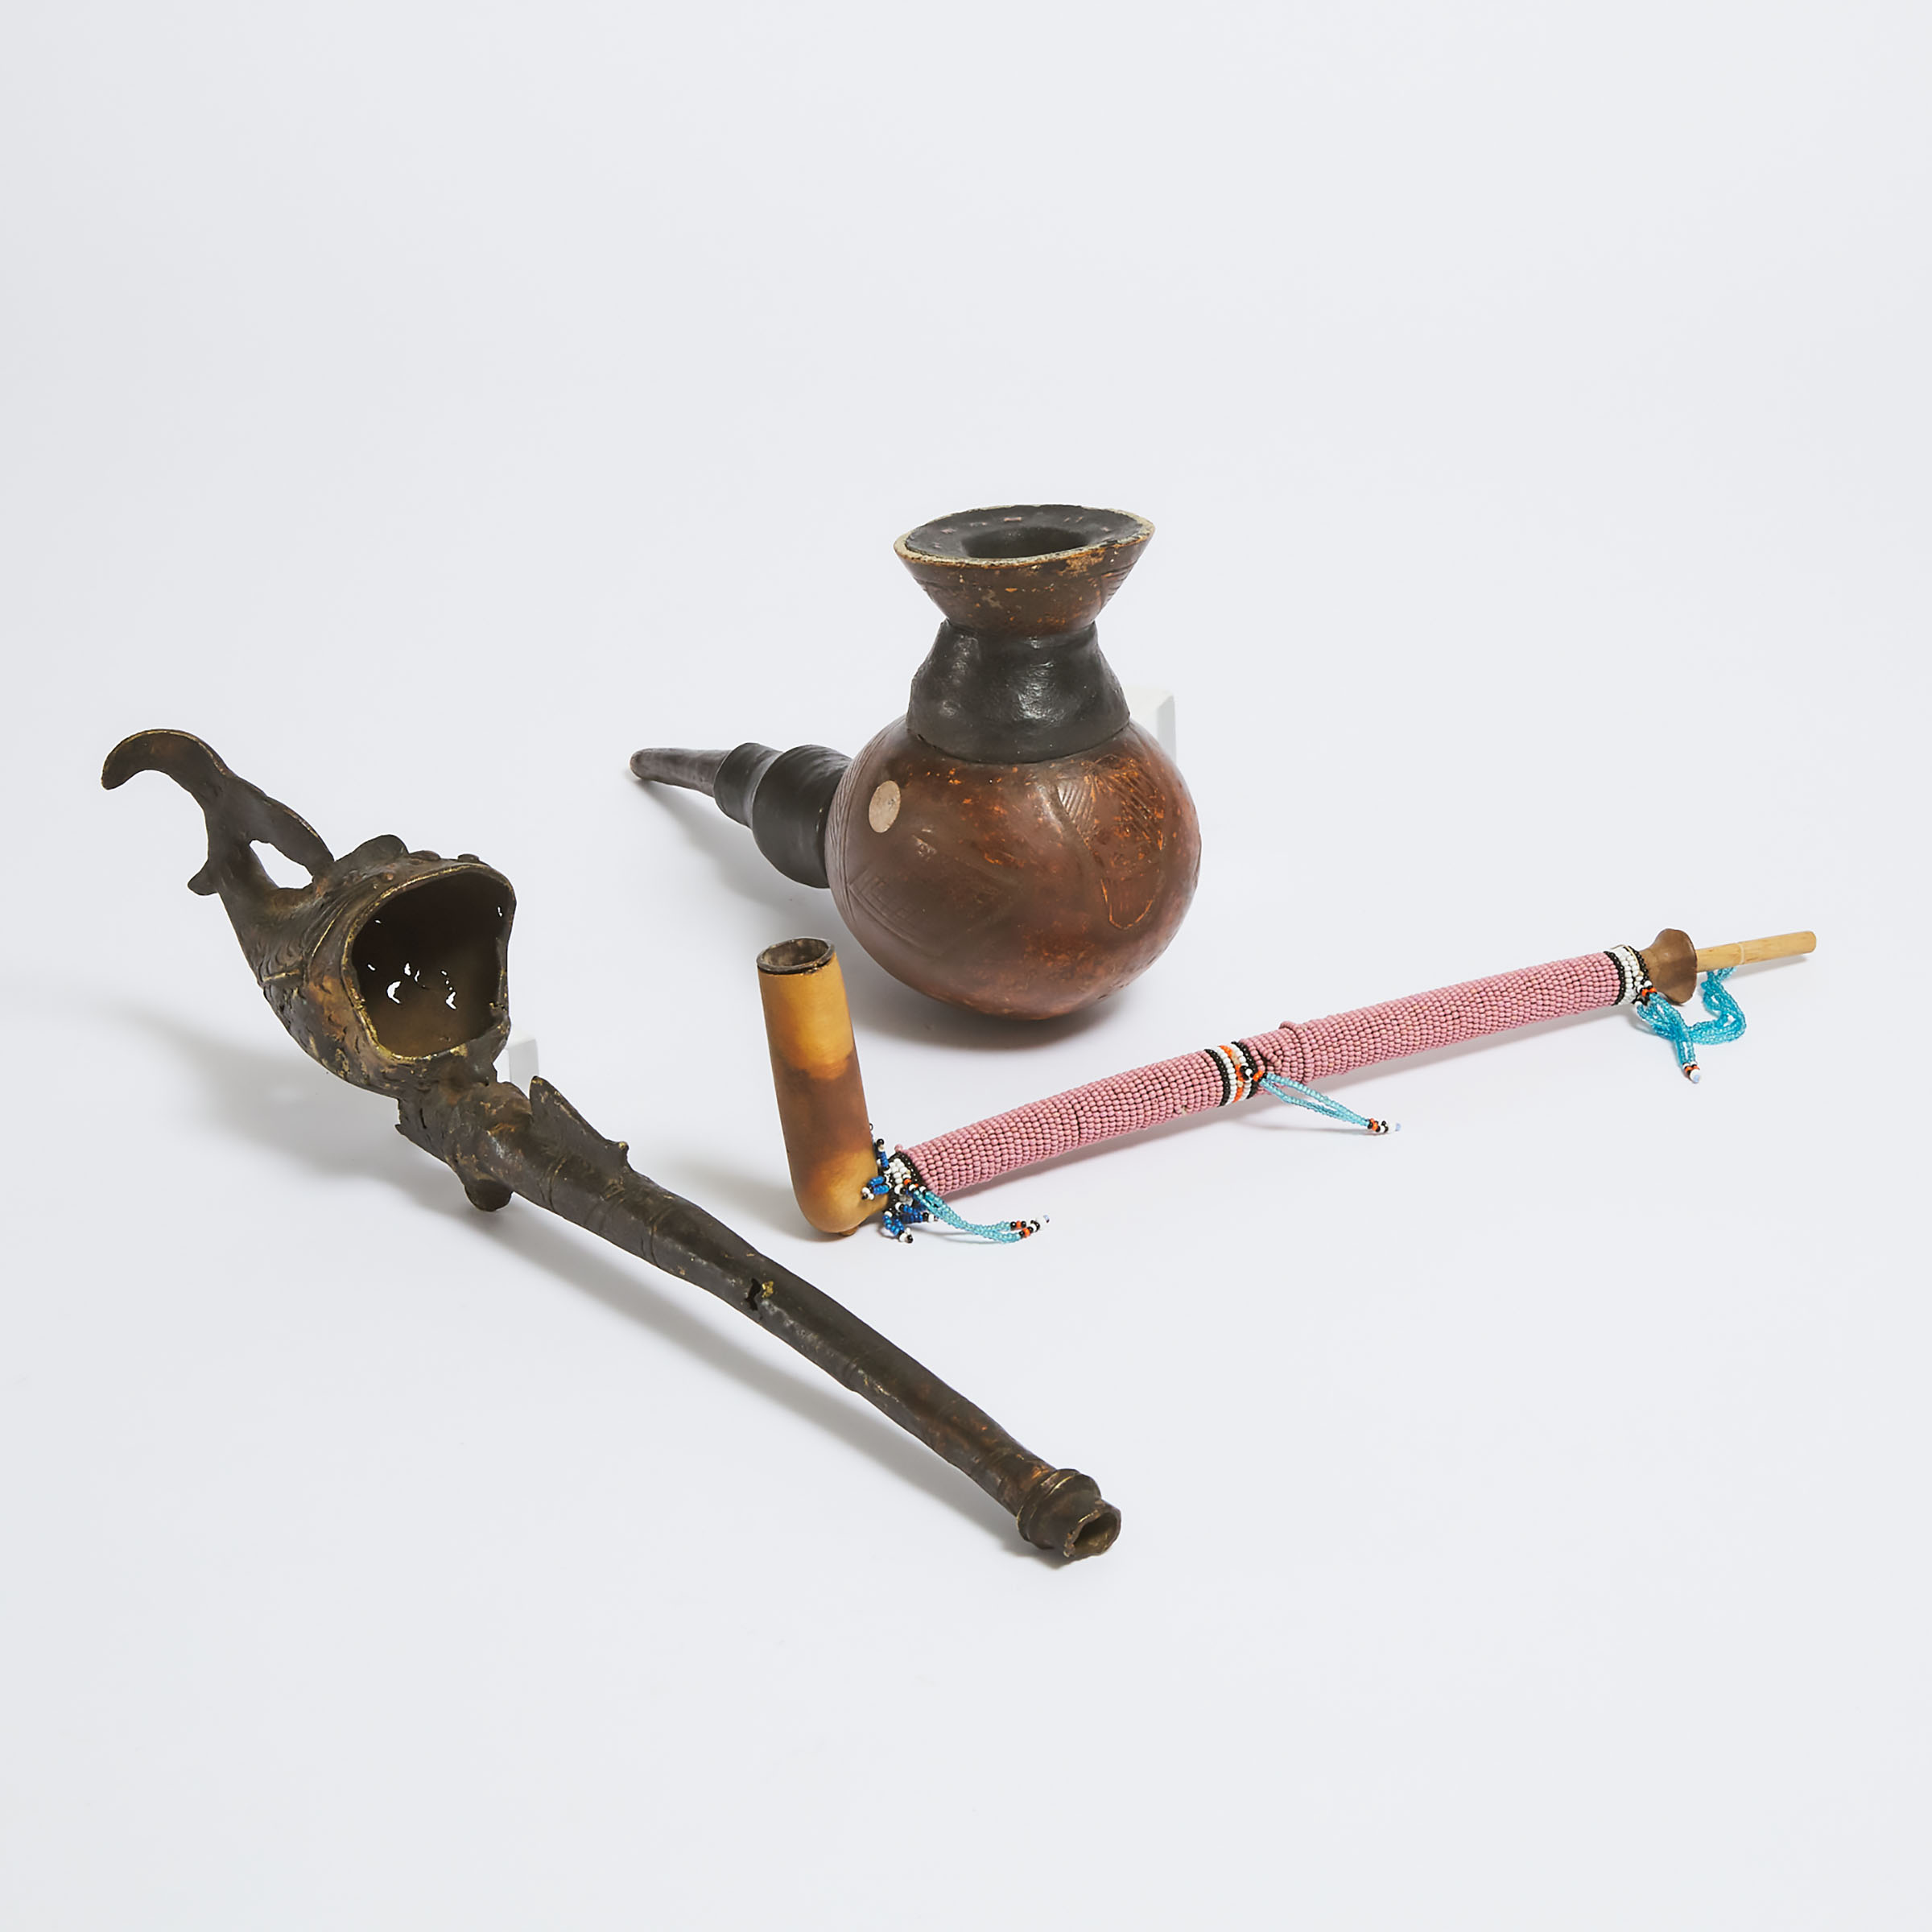 Two African Pipes together with a Decorative Pipe, 20th century